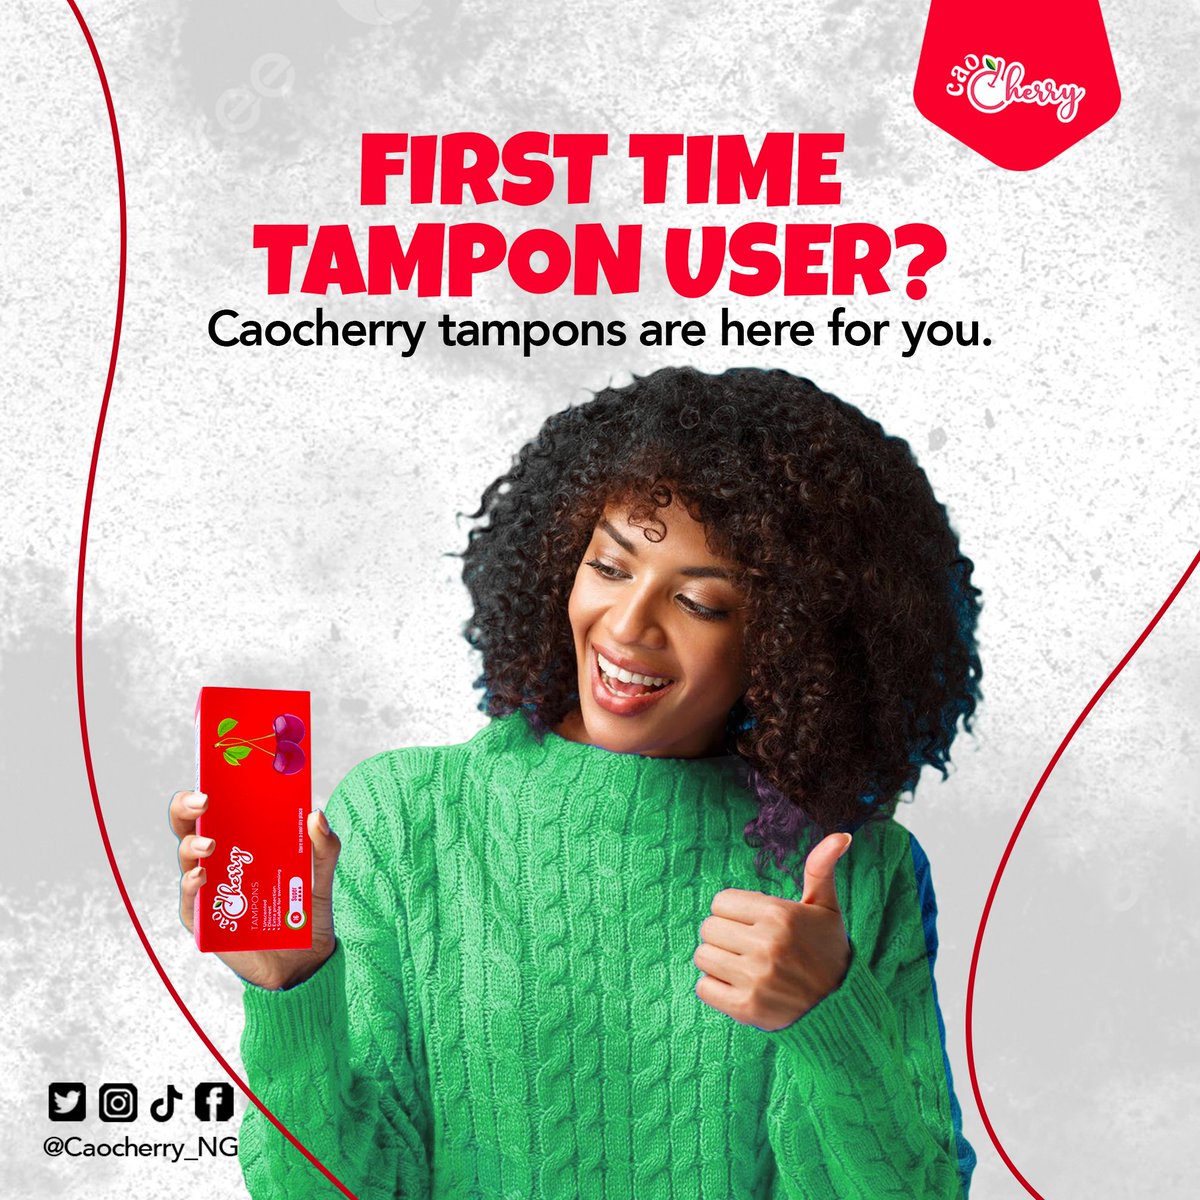 New to tampons? 
Don't worry, Caocherry tampons are designed even for beginners to use!

Buy now and enjoy an exciting level of period comfort!

#PeriodSupport #FeminineCare #FeminineHygiene #CAOCherrytampons